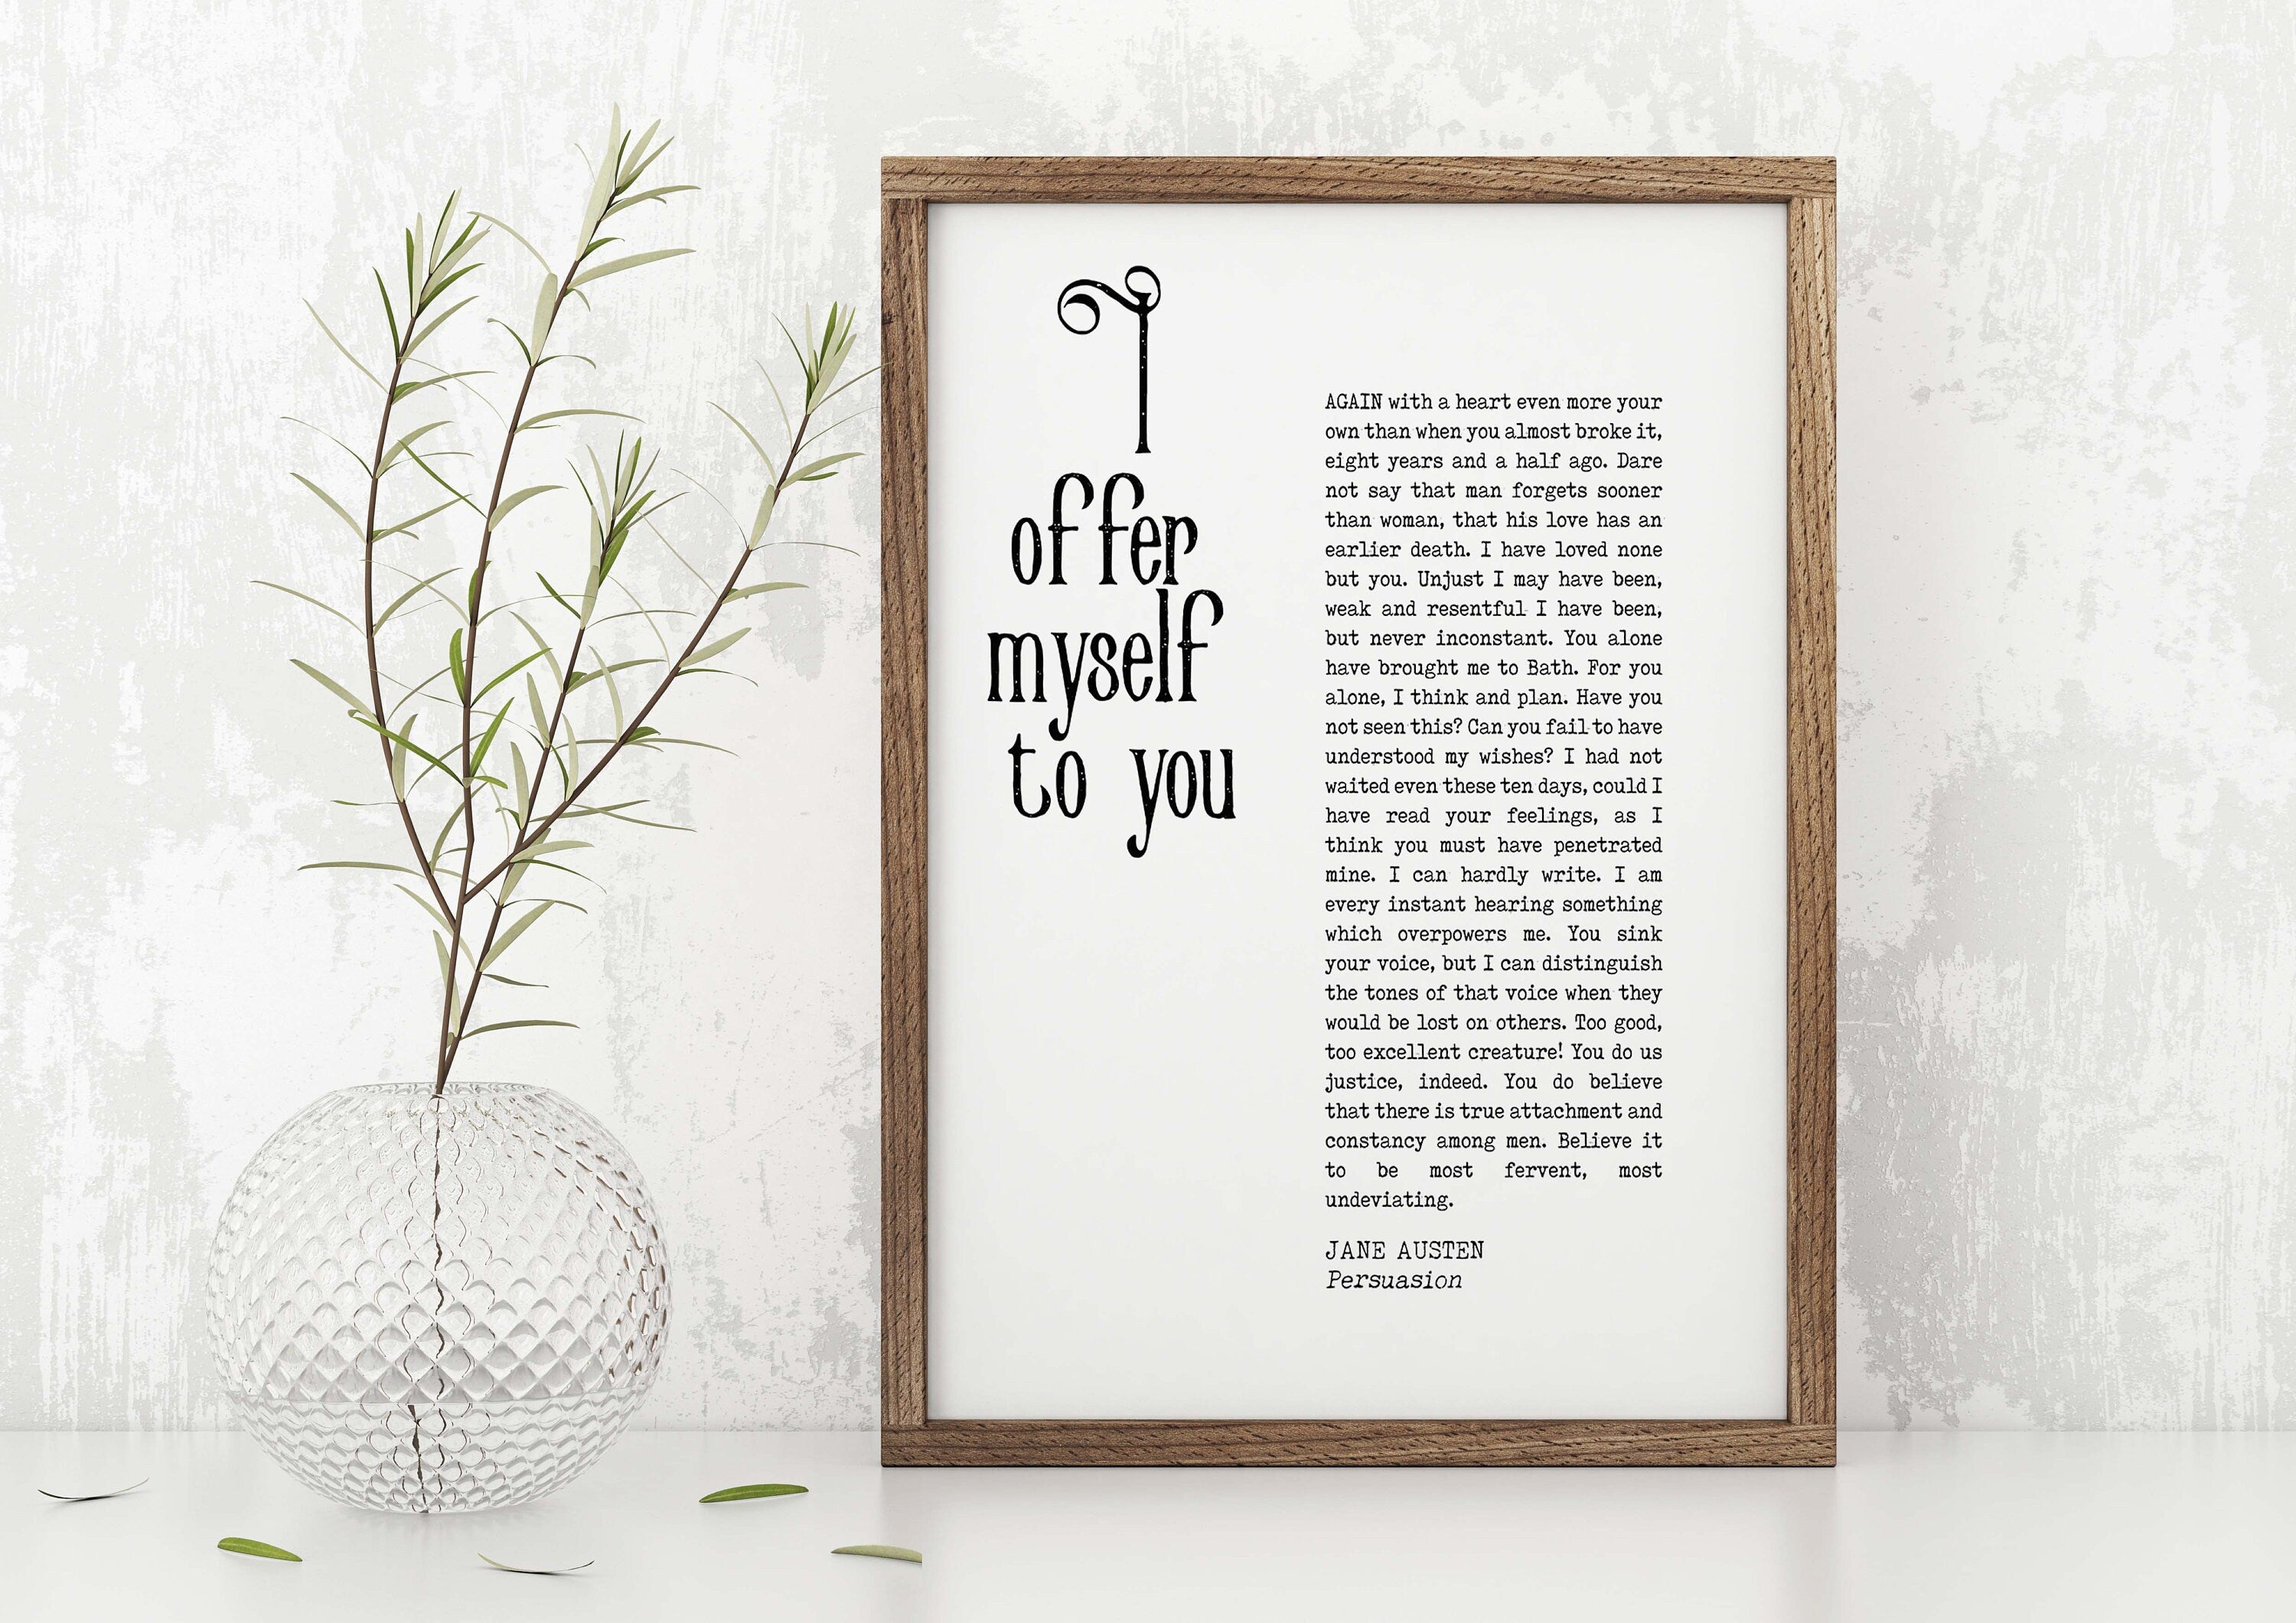 I Offer Myself To You Jane Austen Quote Wall Art Prints, Unframed Persuasion Book Quote Decor in Black & White